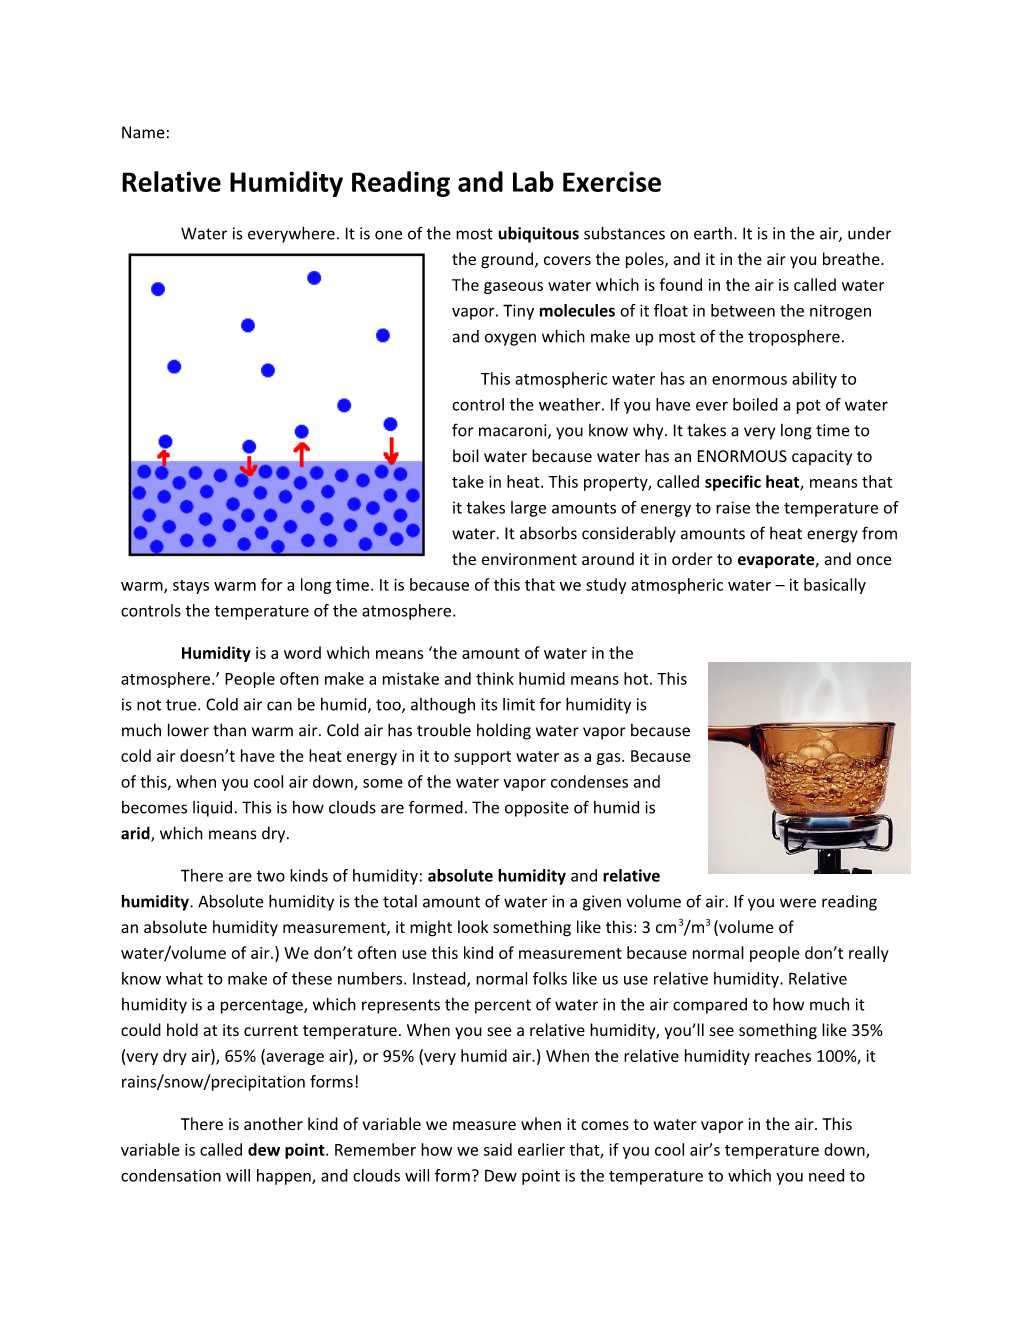 Relative Humidity Reading and Lab Exercise